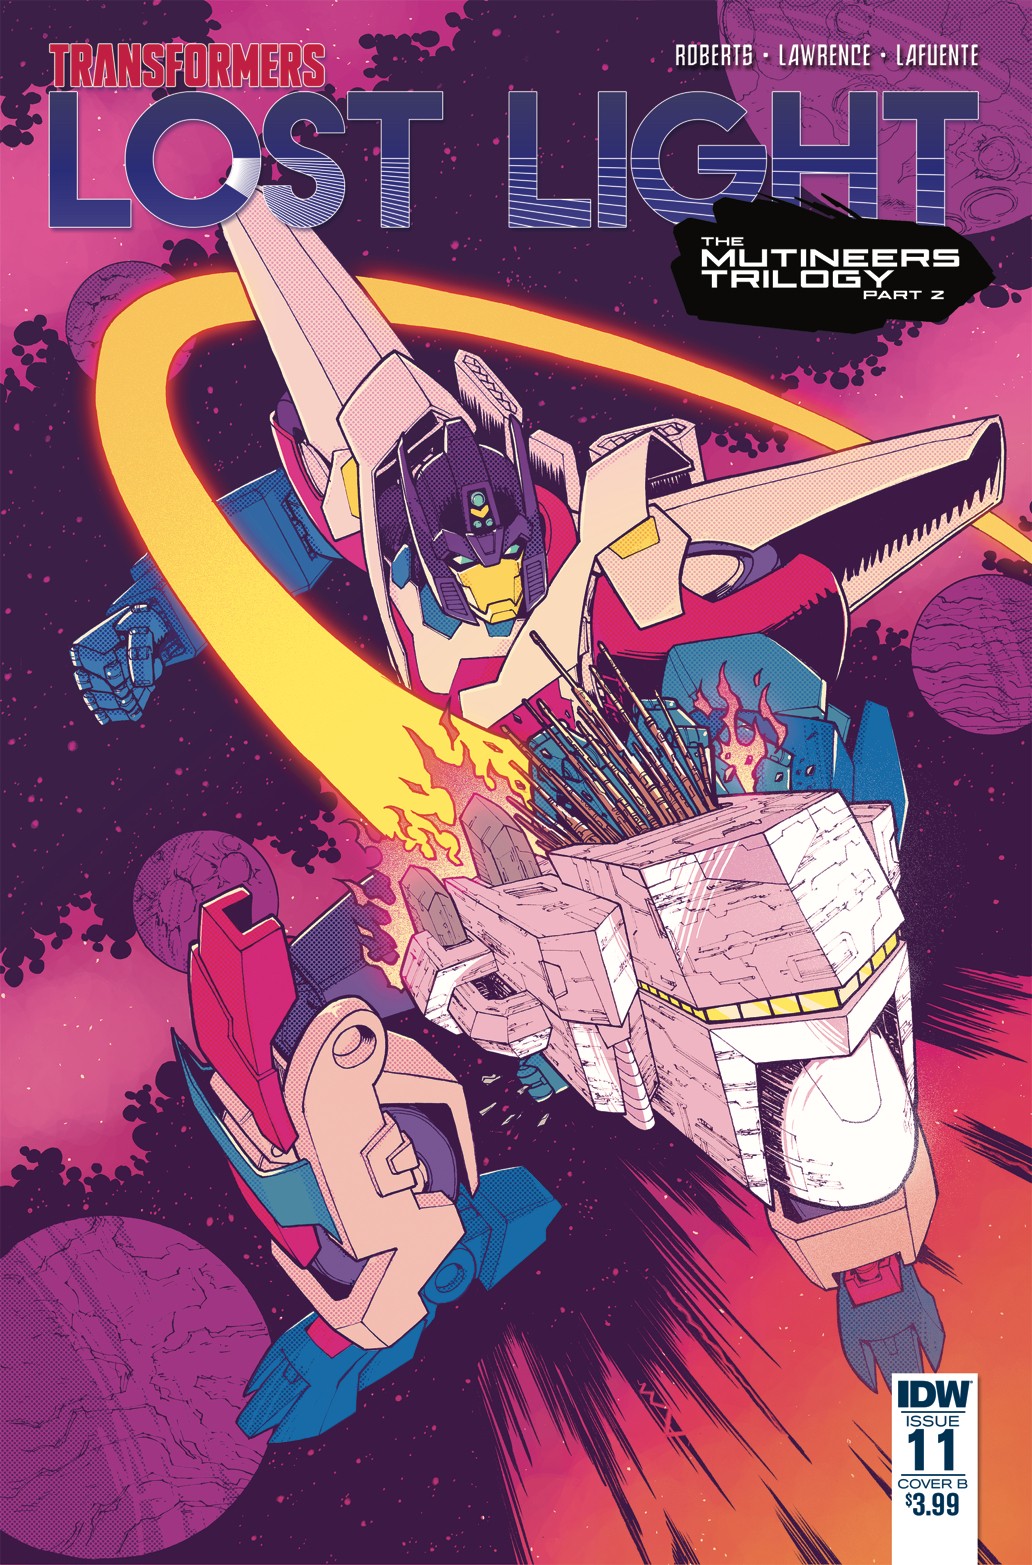 Transformers News: Variant Covers for IDW Transformers: Lost Light #11 by Roche/Burcham, Milne/Perez, Lafuente